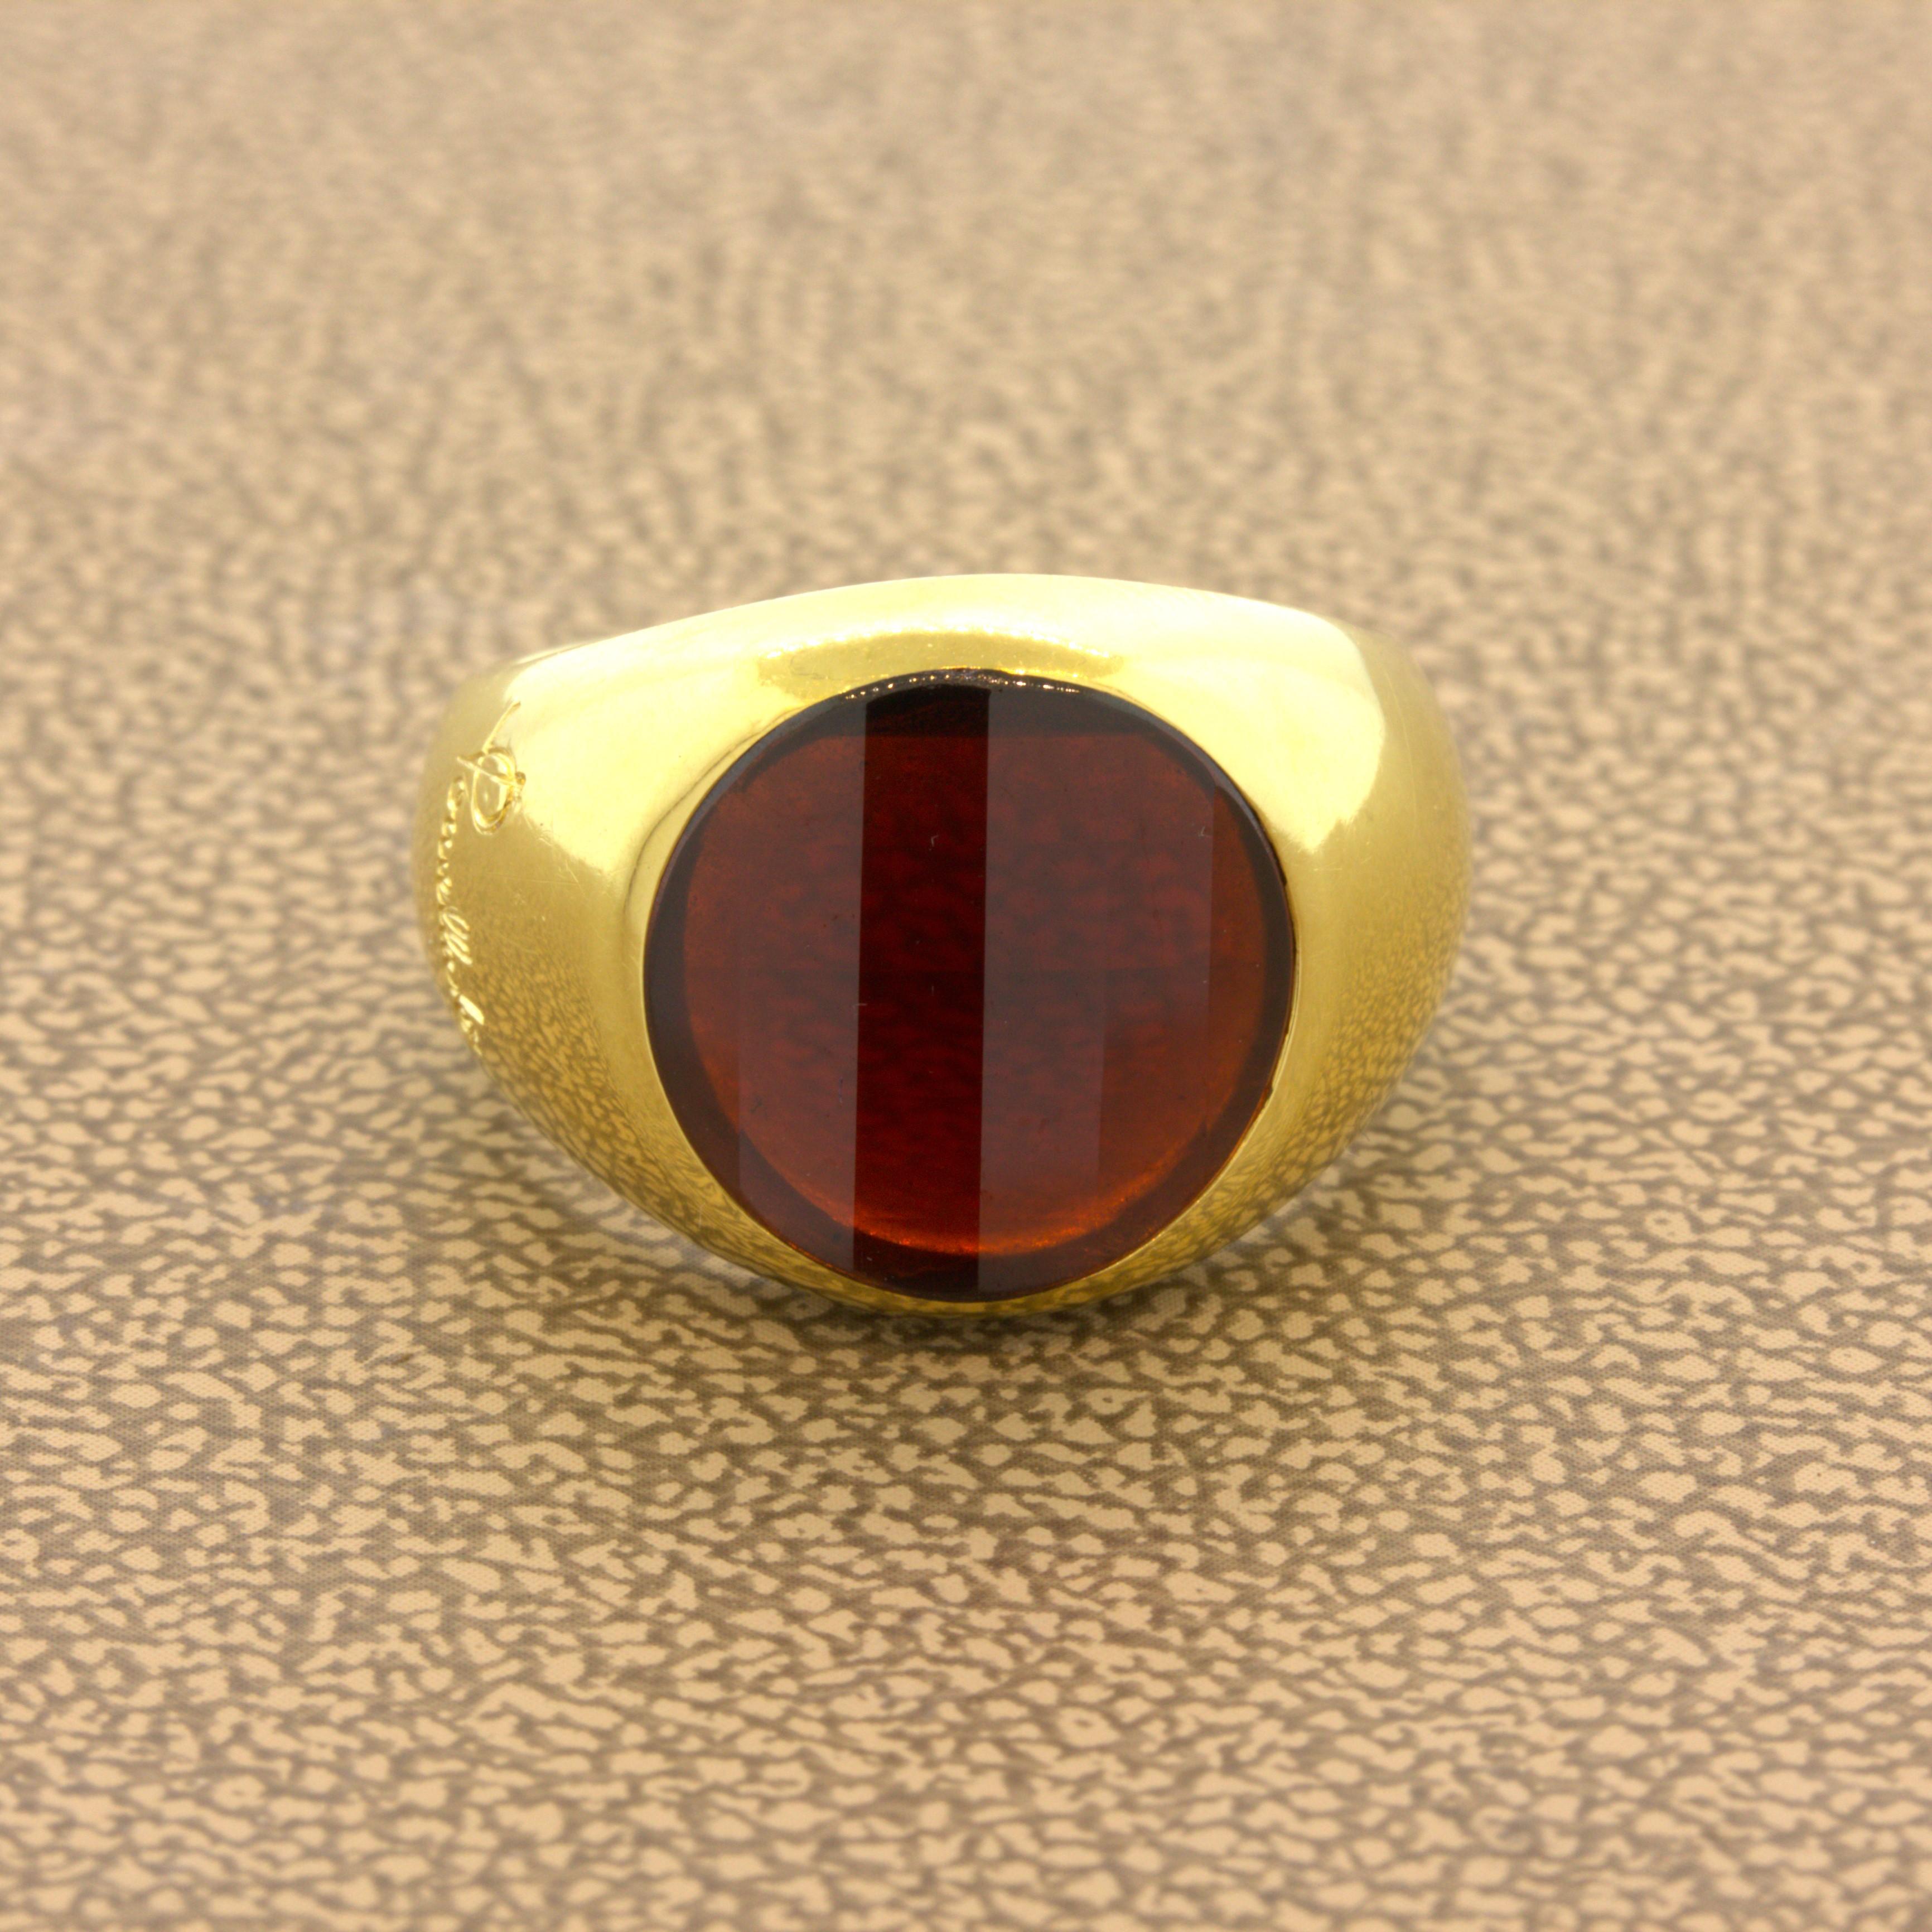 A simple yet very stylish ring by Italian designer Pomellato. The ring features a rich orangy-red garnet with a very unique cutting style we have never seen before. On the stones table are vertical step-cuts while the pavilion (bottom) has